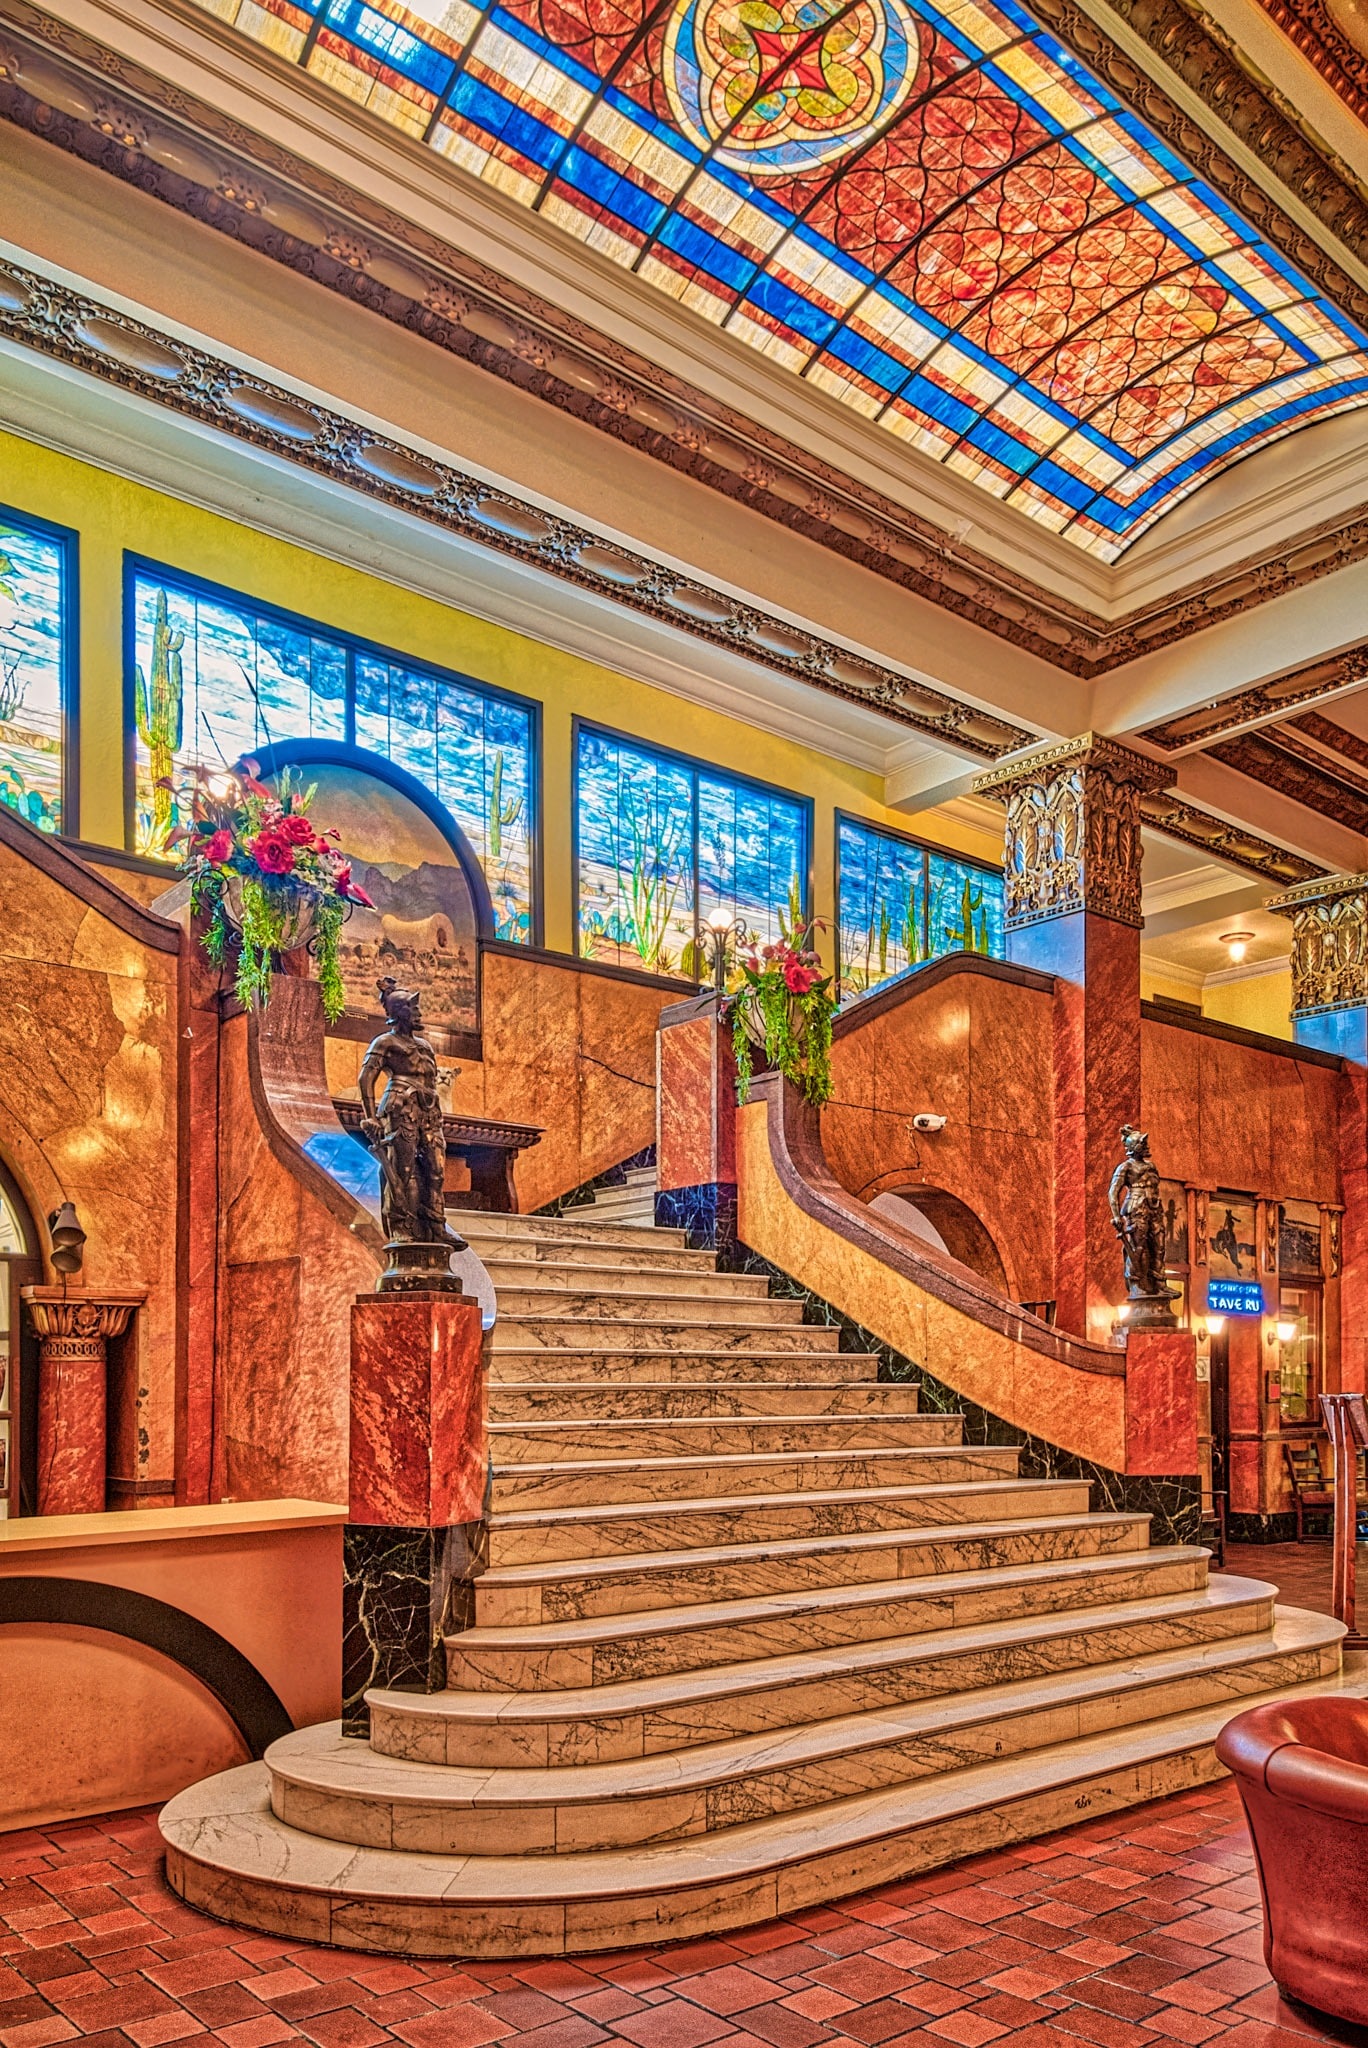 This grand staircase of Italian marble, the Tiffany glass mural, and the stained glass skylights are the centerpieces of the lobby of the Gadsden Hotel in Douglas, Arizona.